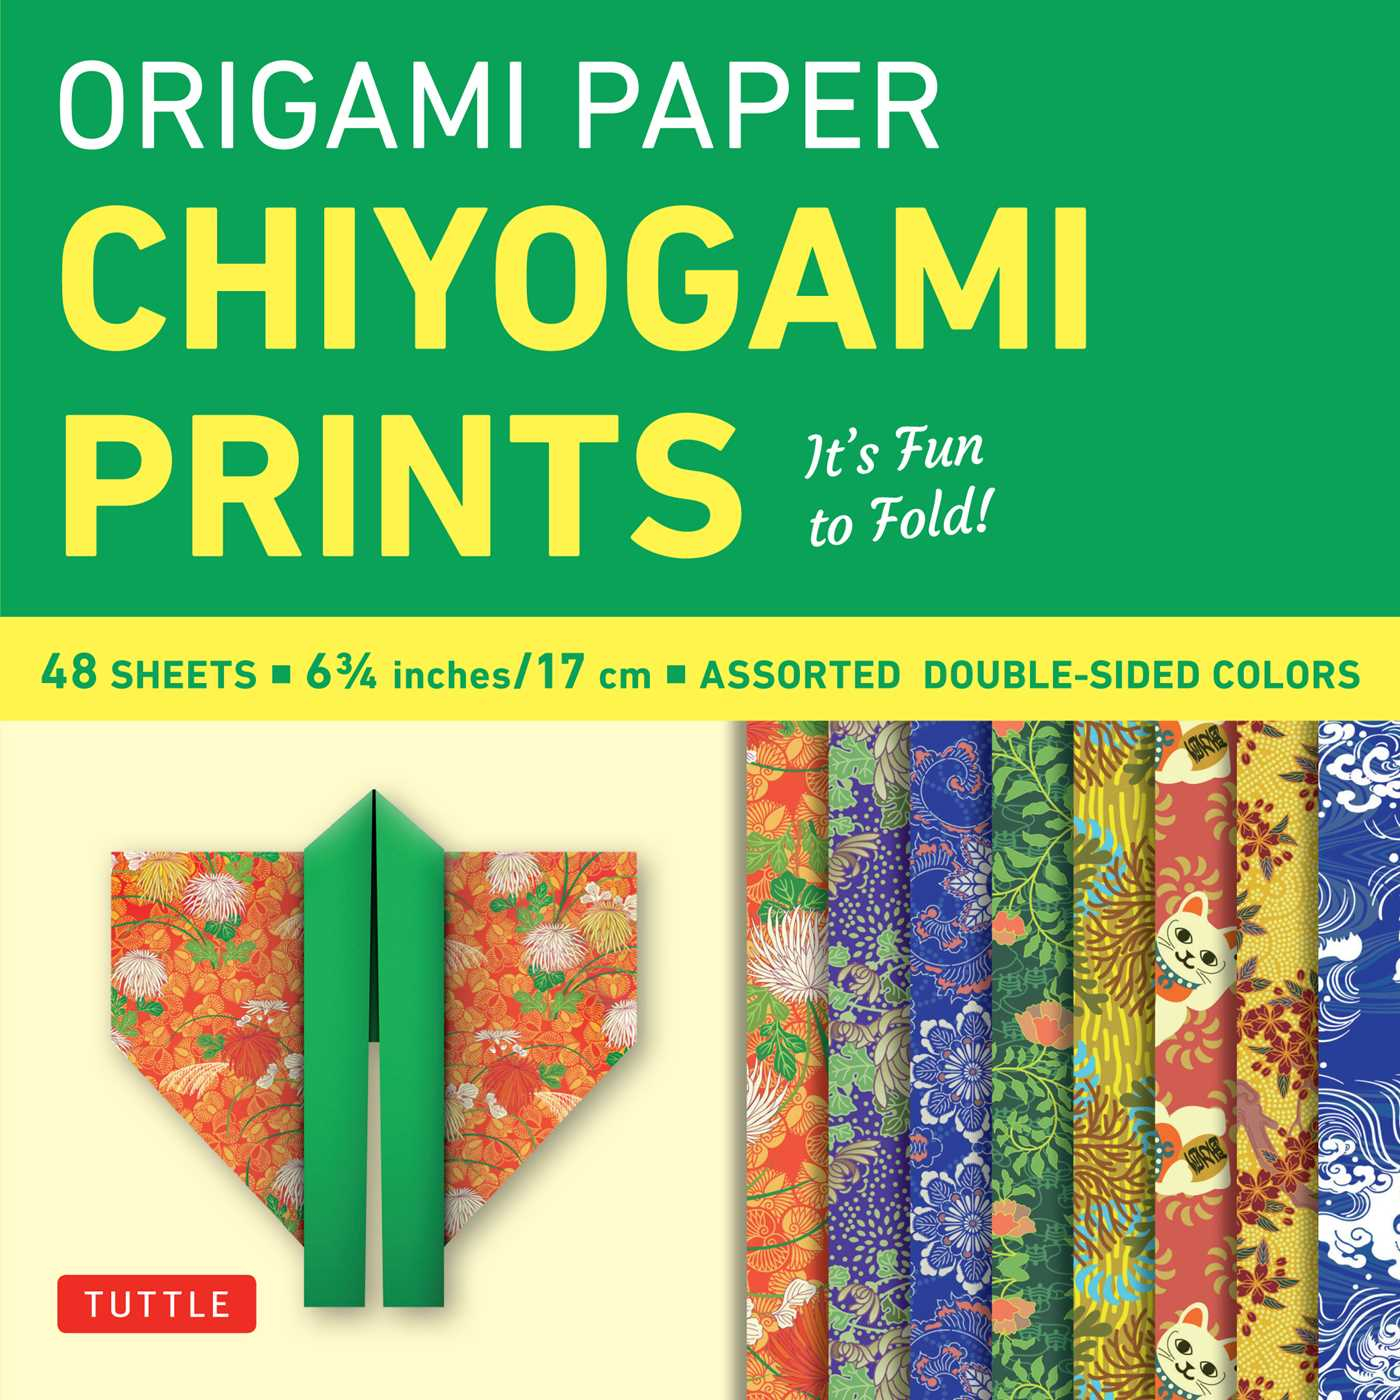 Paper Origami Designs Origami Paper Chiyogami Prints 6 34 48 Sheets Tuttle Origami Paper High Quality Origami Sheets Printed With 8 Different Patterns